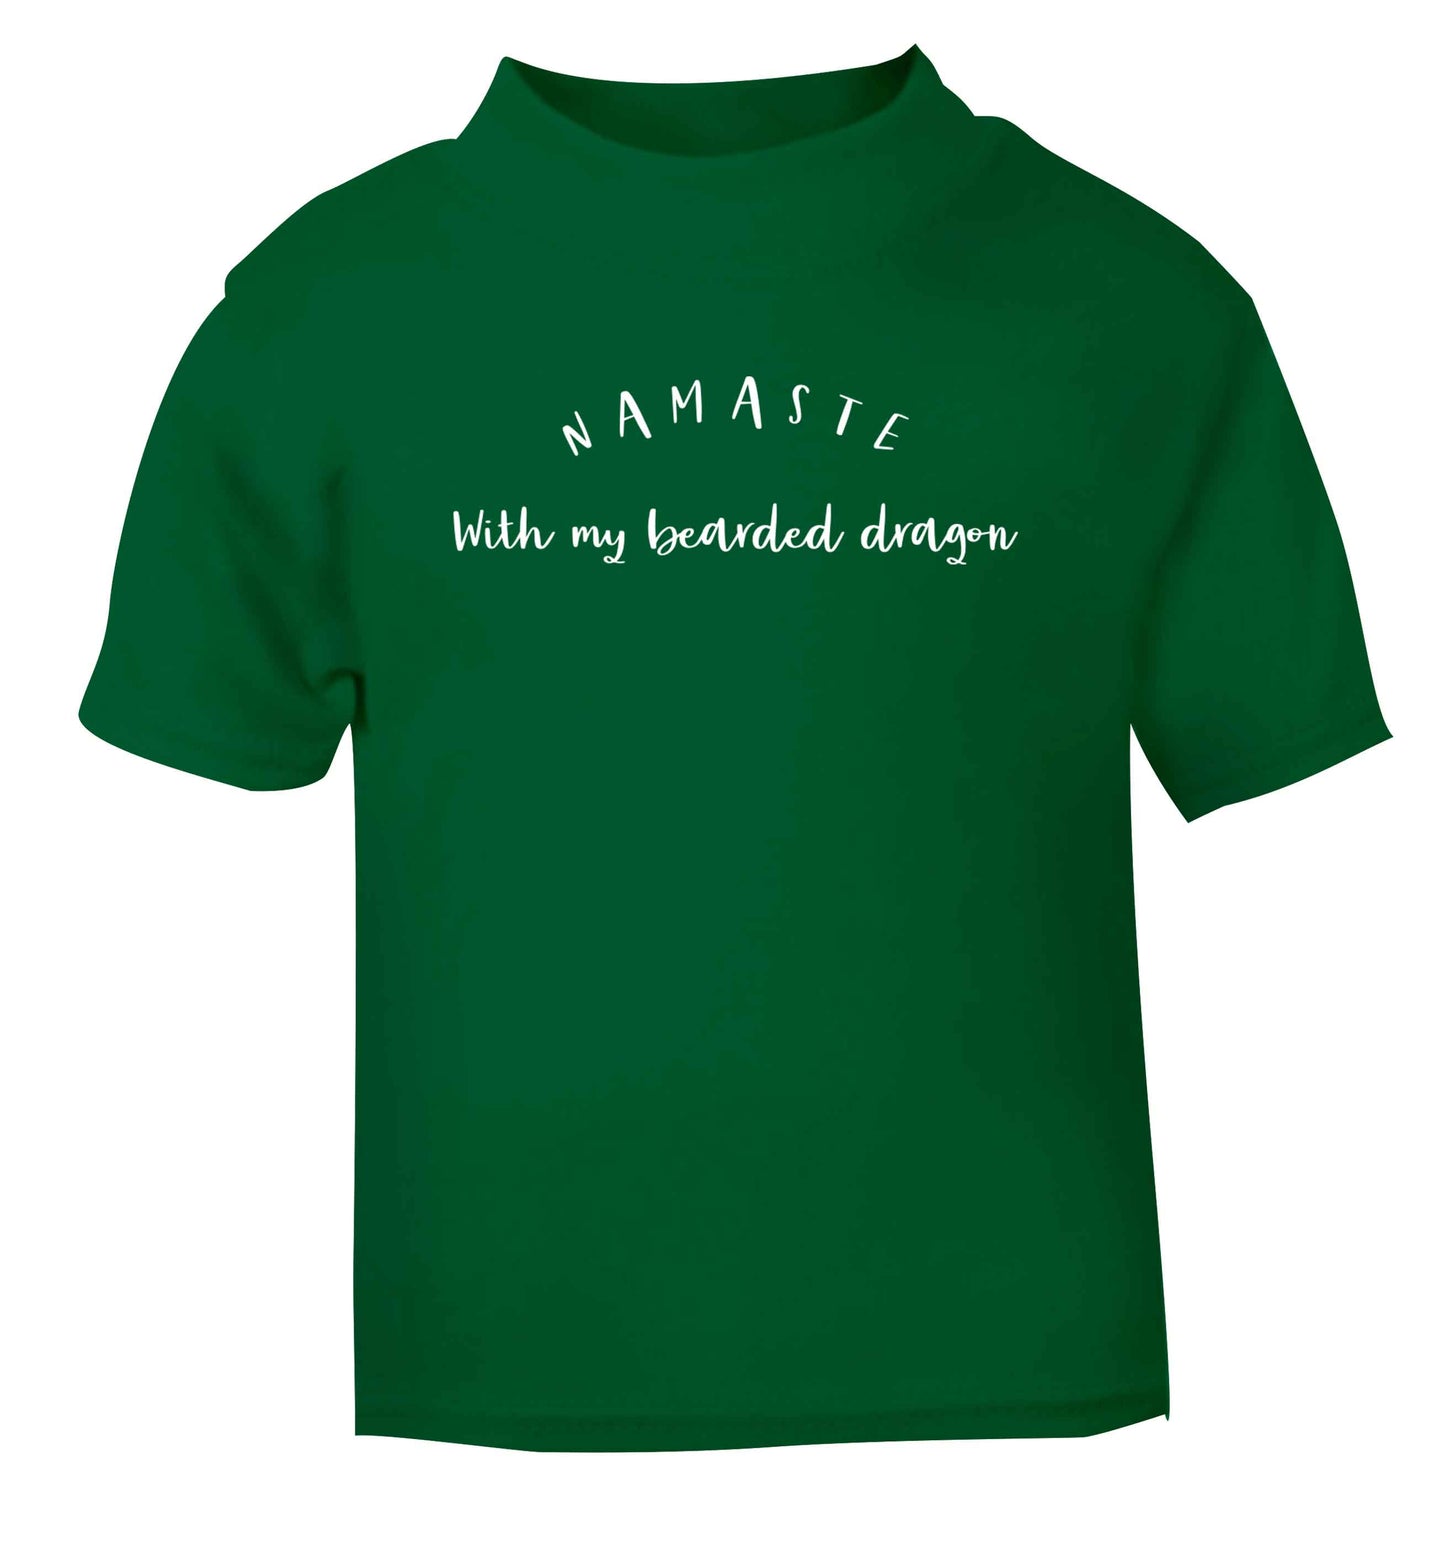 Namaste with my bearded dragon green Baby Toddler Tshirt 2 Years